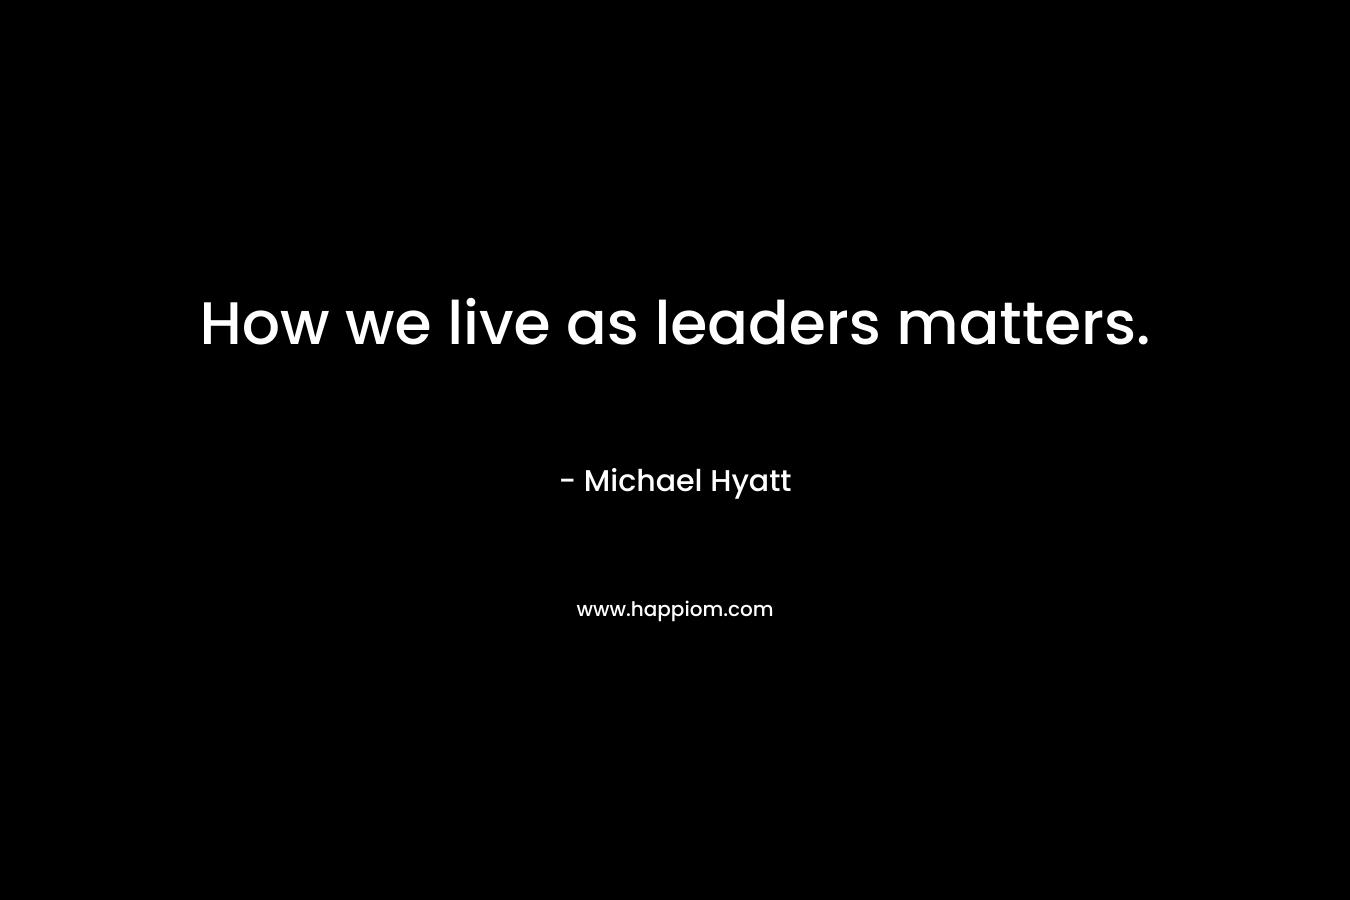 How we live as leaders matters.